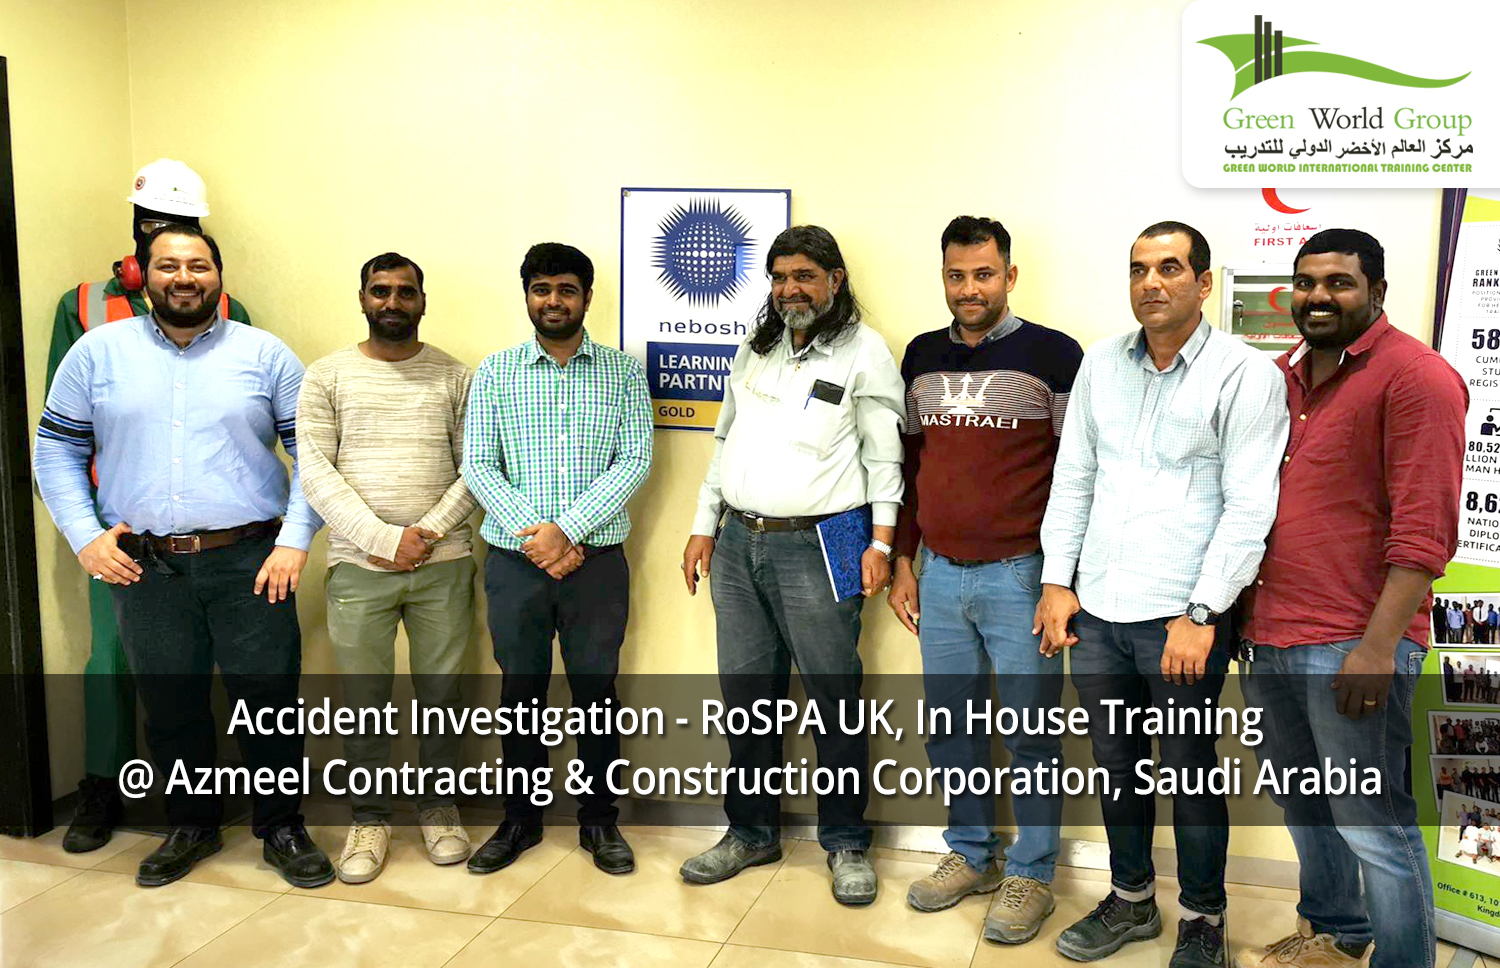 Accident Investigation - RoSPA UK, In House Training